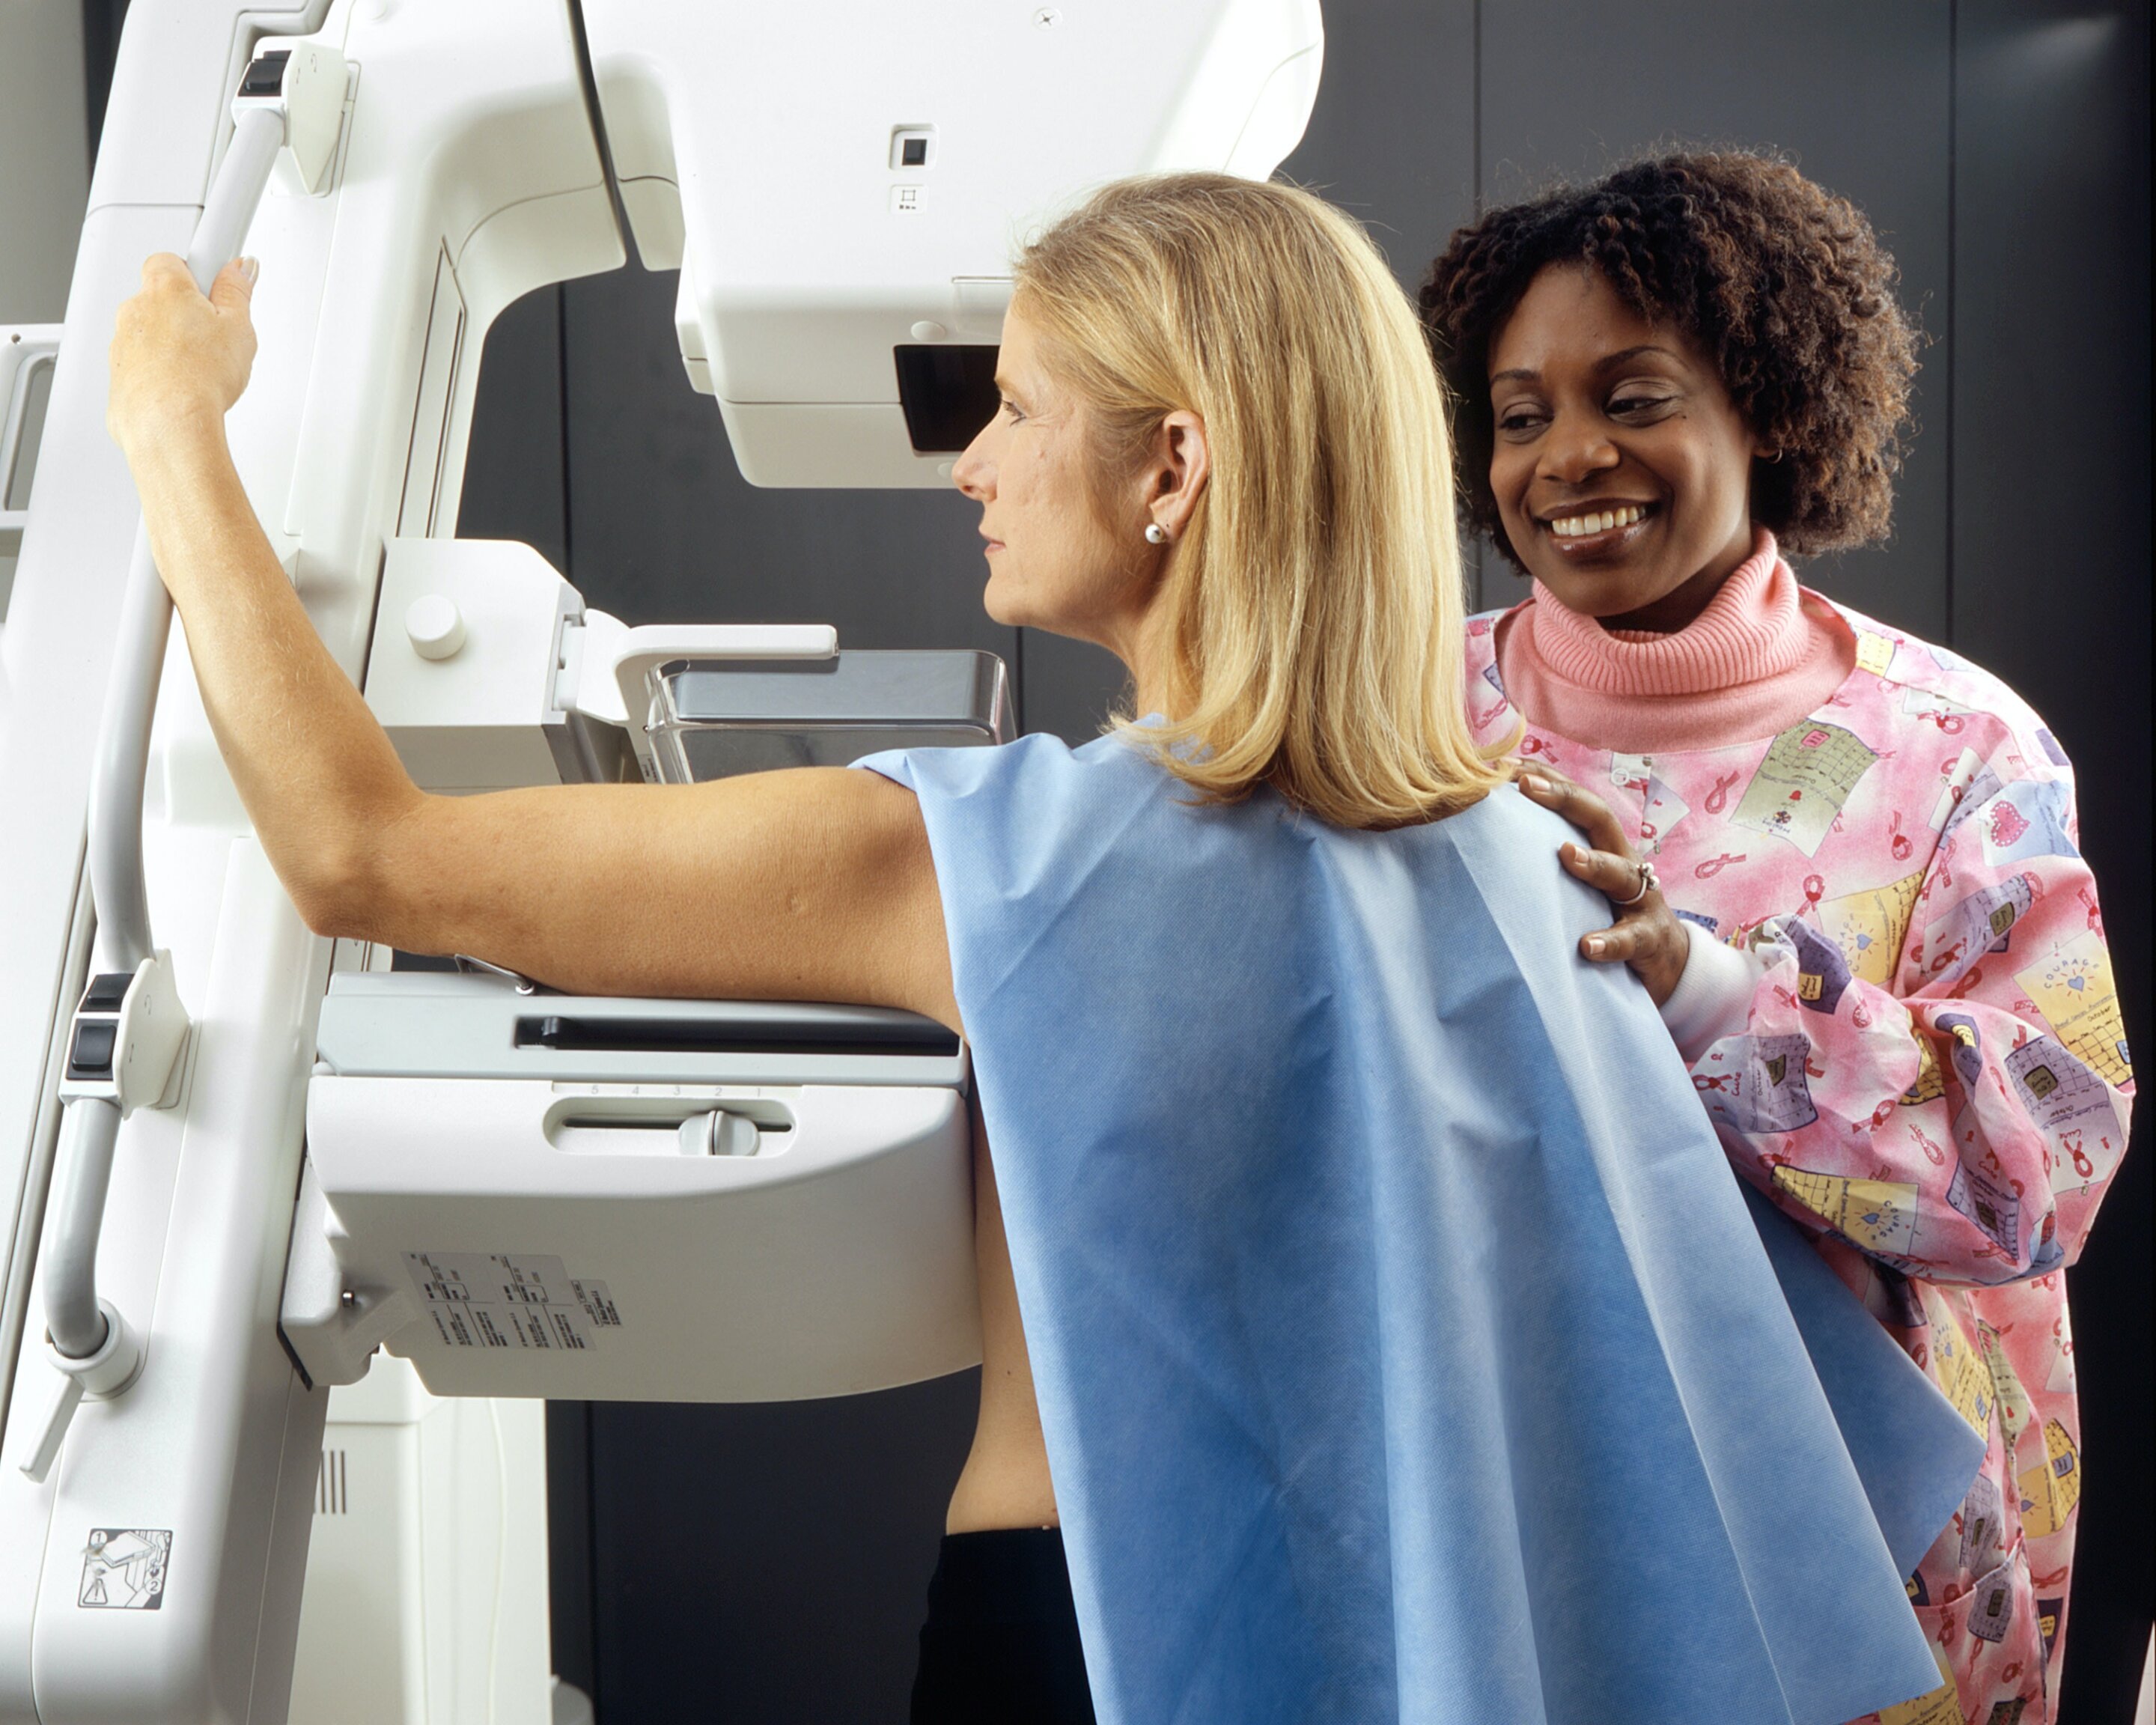 #Study finds large gap in breast cancer treatment recommendations for patients aged 70 vs. 69